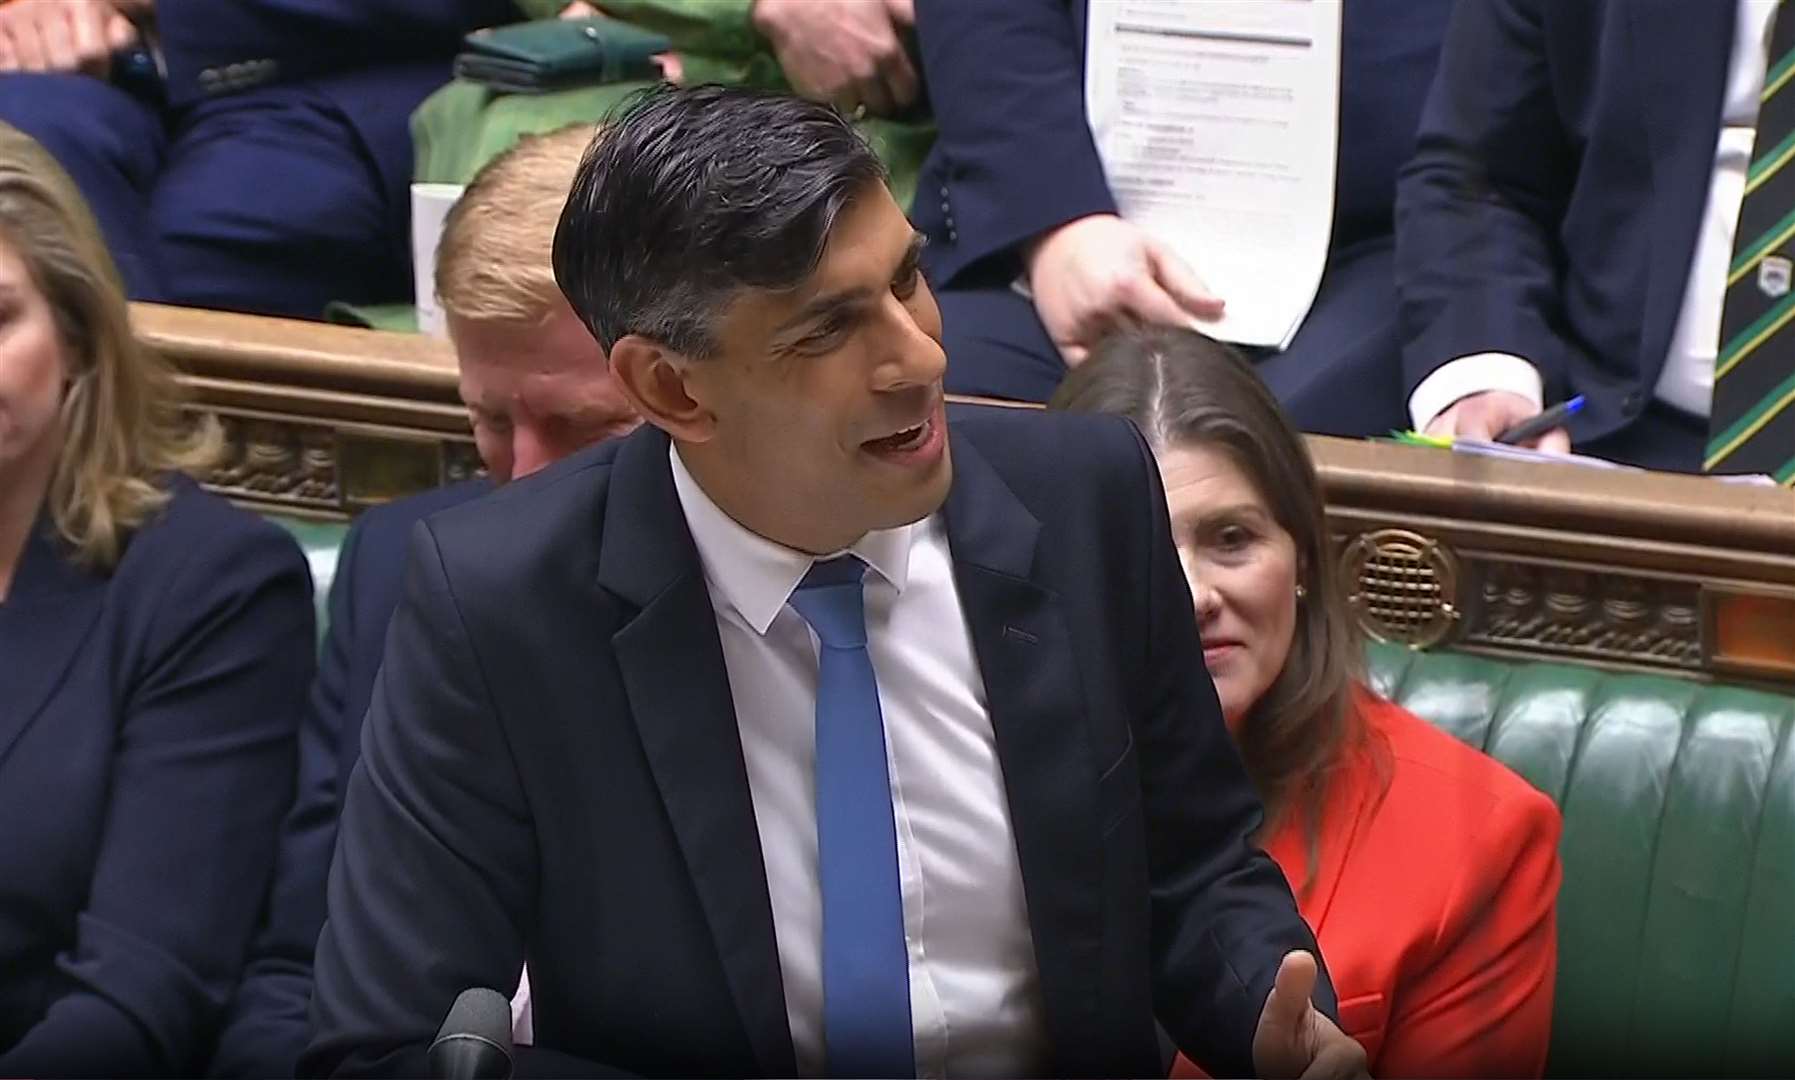 Prime Minister Sunak told MPs the Horizon scandal was one of the worst miscarriages of justice in history (House of Commons/UK Parliament/PA)